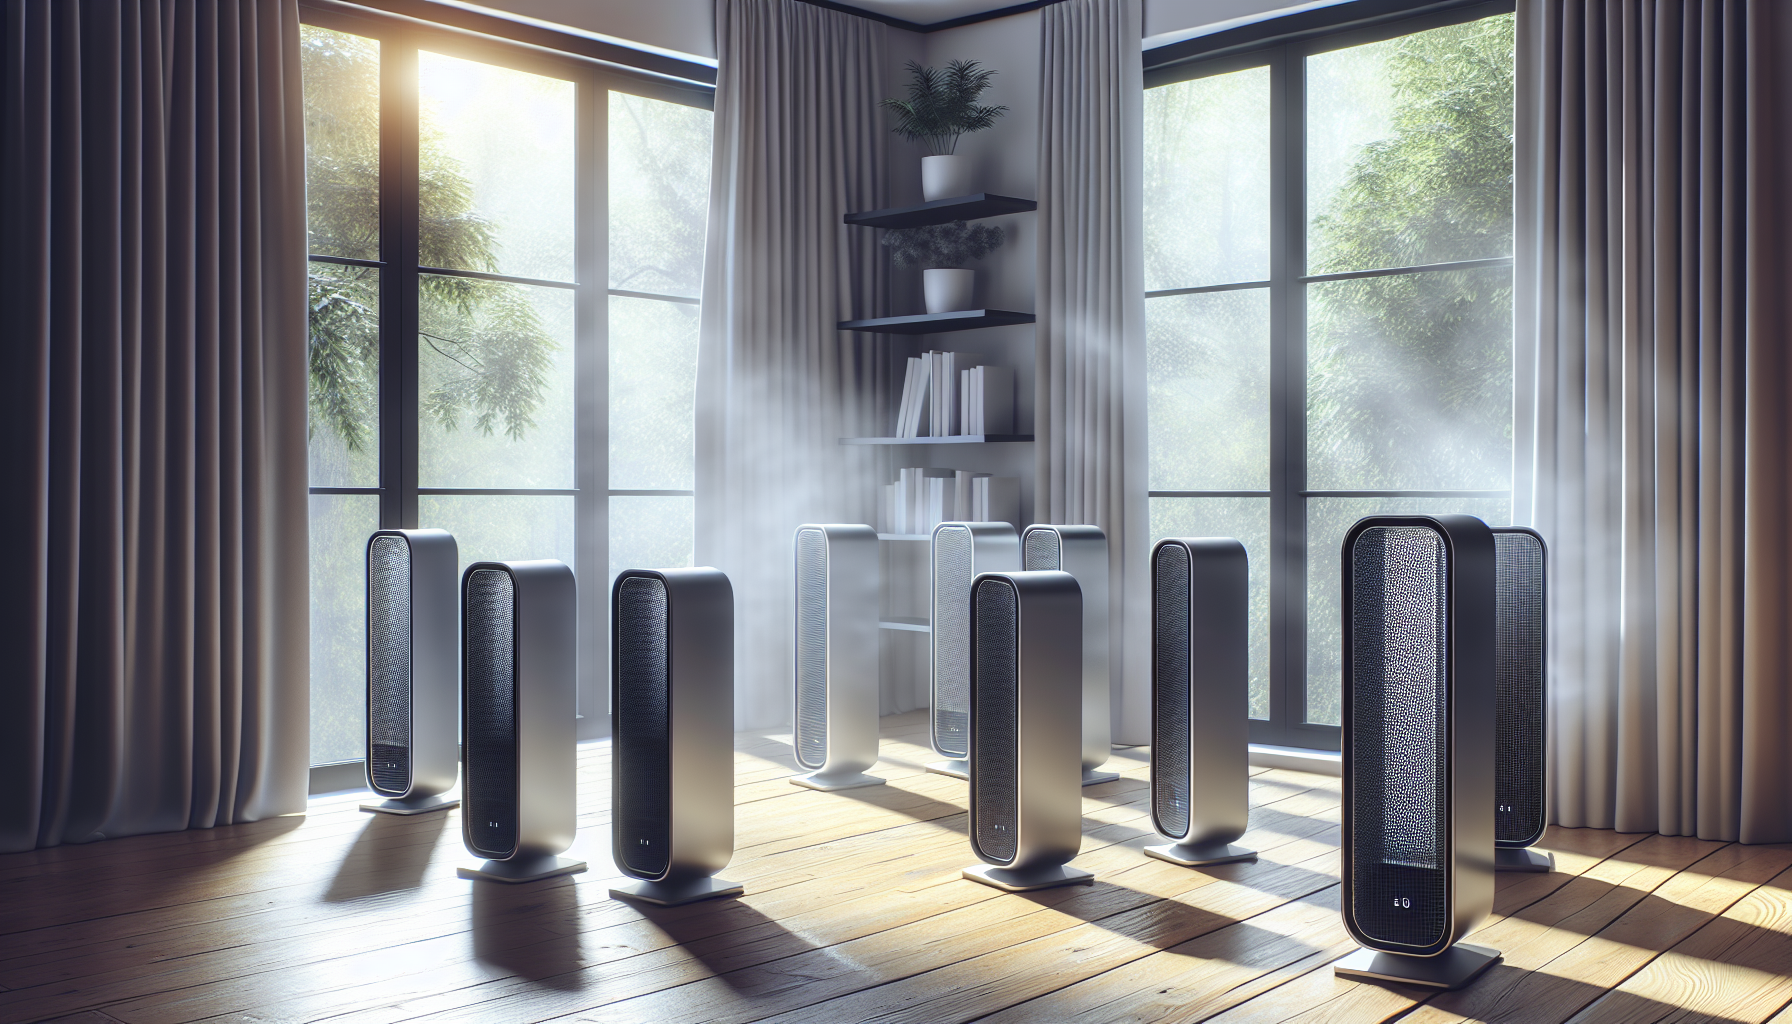 Air purifiers and ventilation to neutralize cannabis aroma